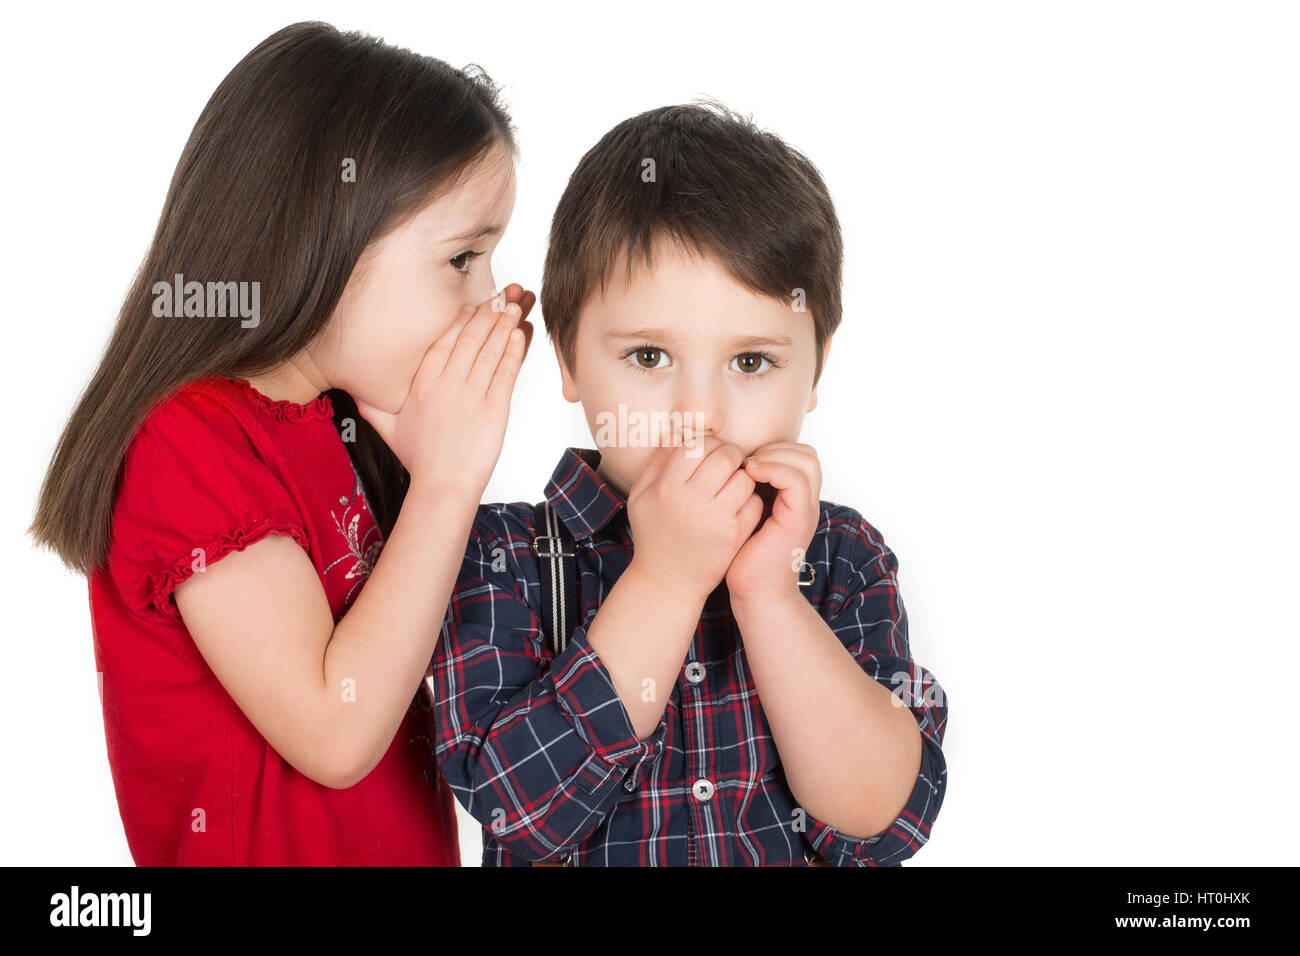 Girl whispering in a little boy`s ear. Boy covering his mouth with his hands. Scared or he cant believe. Isolated on a white background. Stock Photo